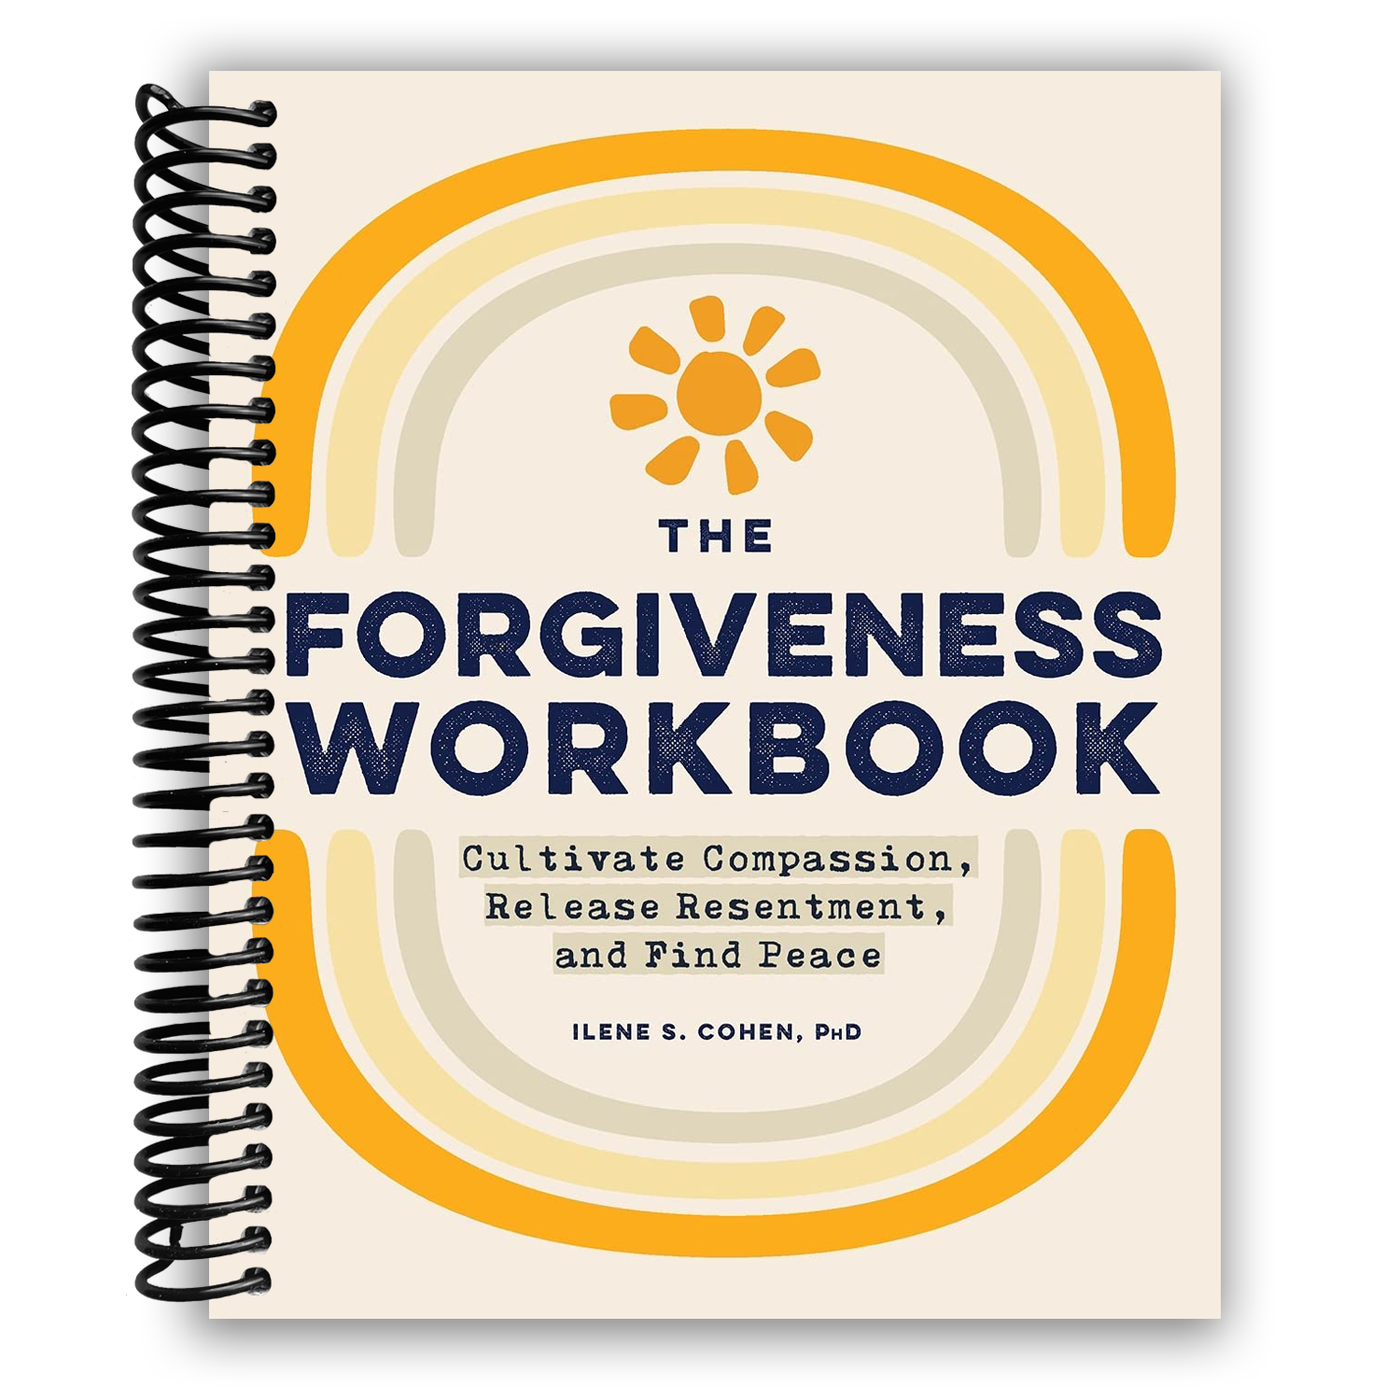 The Forgiveness Workbook: Cultivate Compassion, Release Resentment, and Find Peace (Spiral Bound)